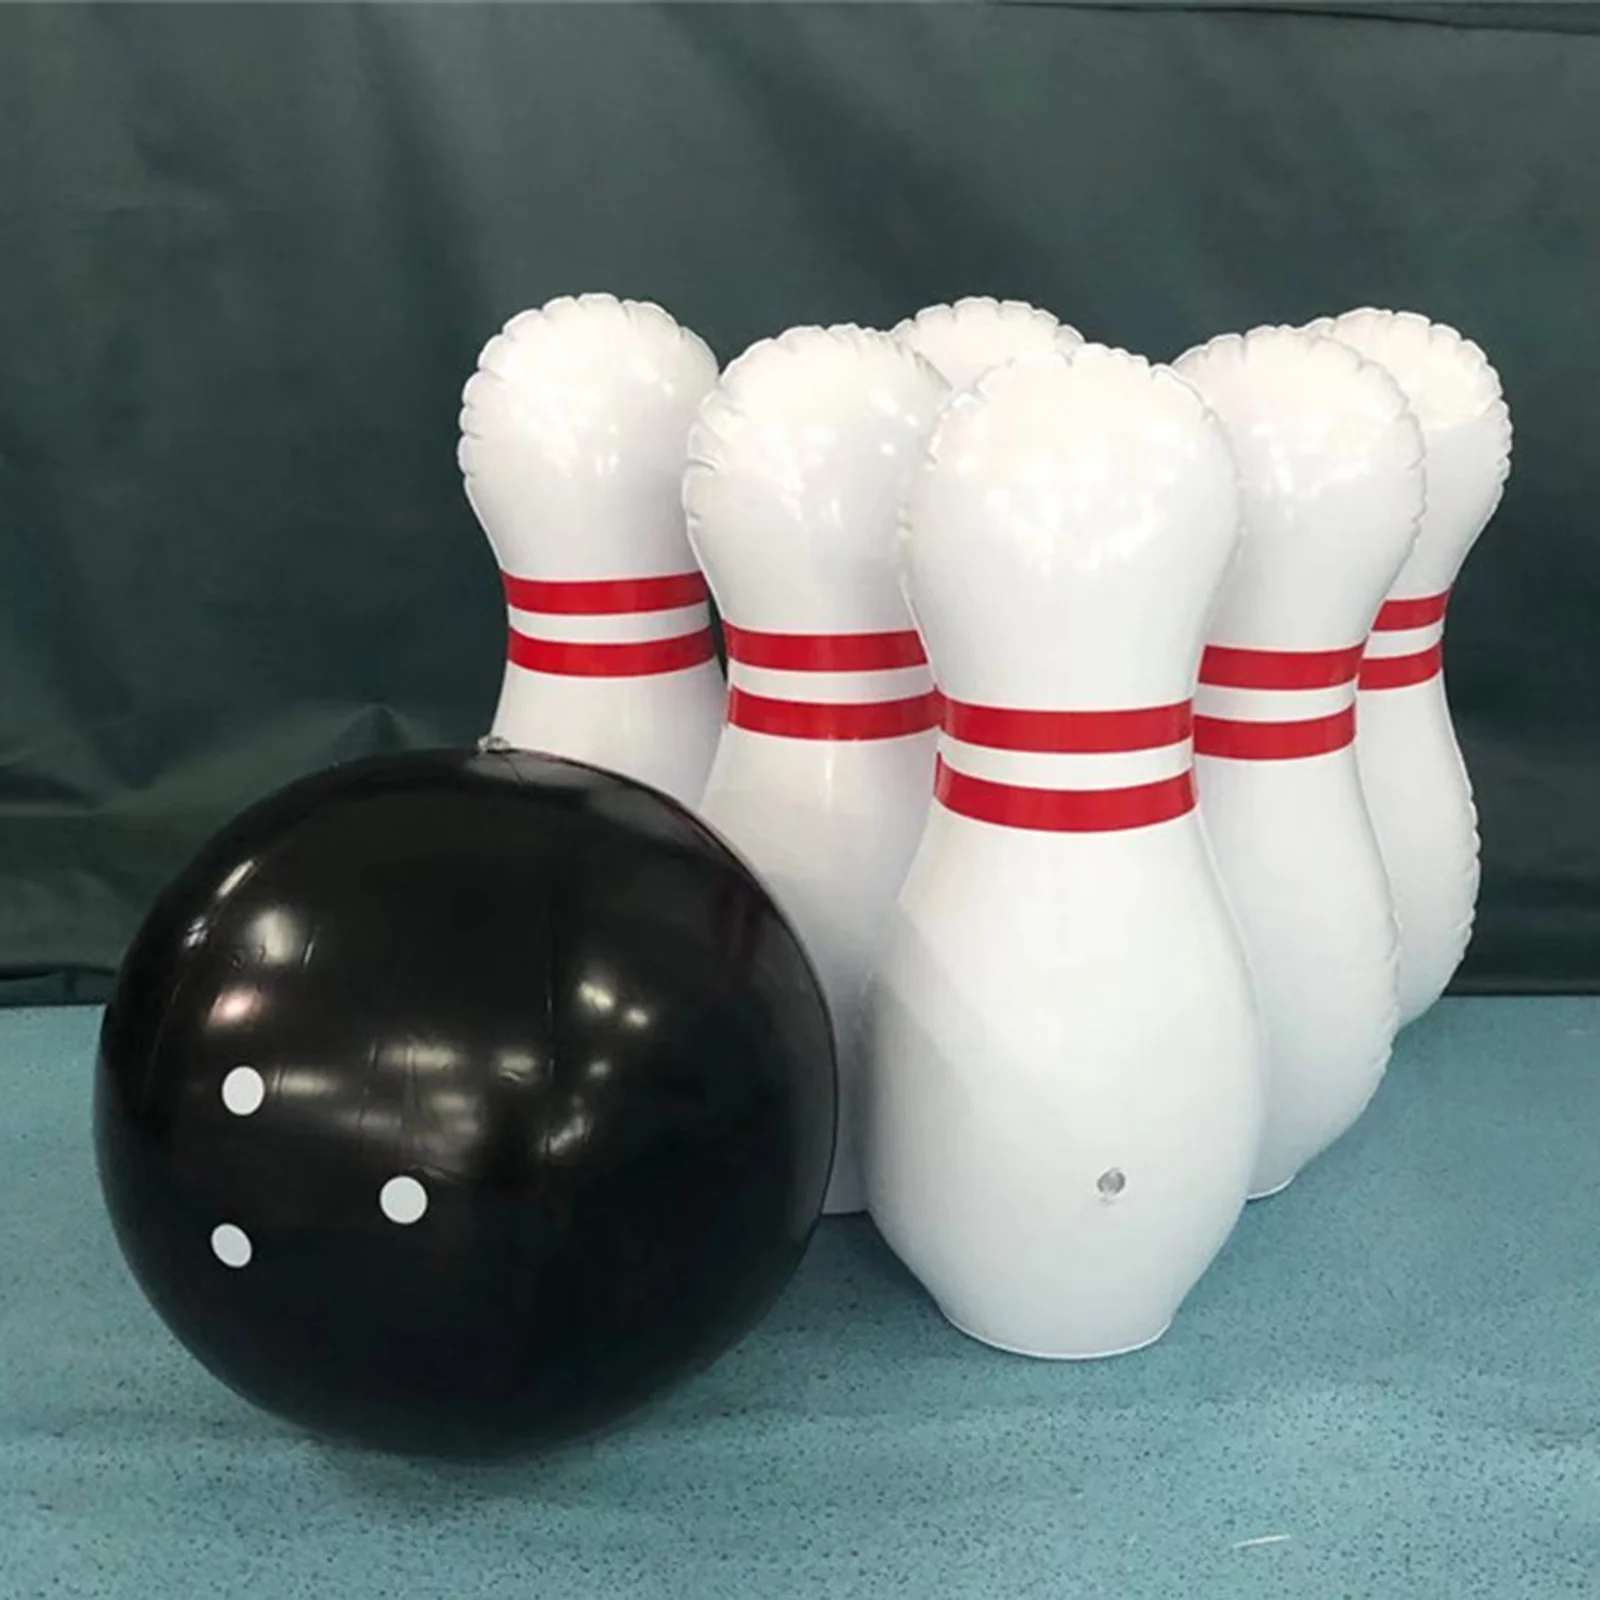 Inflatable Bowling Set (60x40CM) for Children - 6 Pin Bowling Set for Kids Indoor and Garden Toys Best Game for Family Together